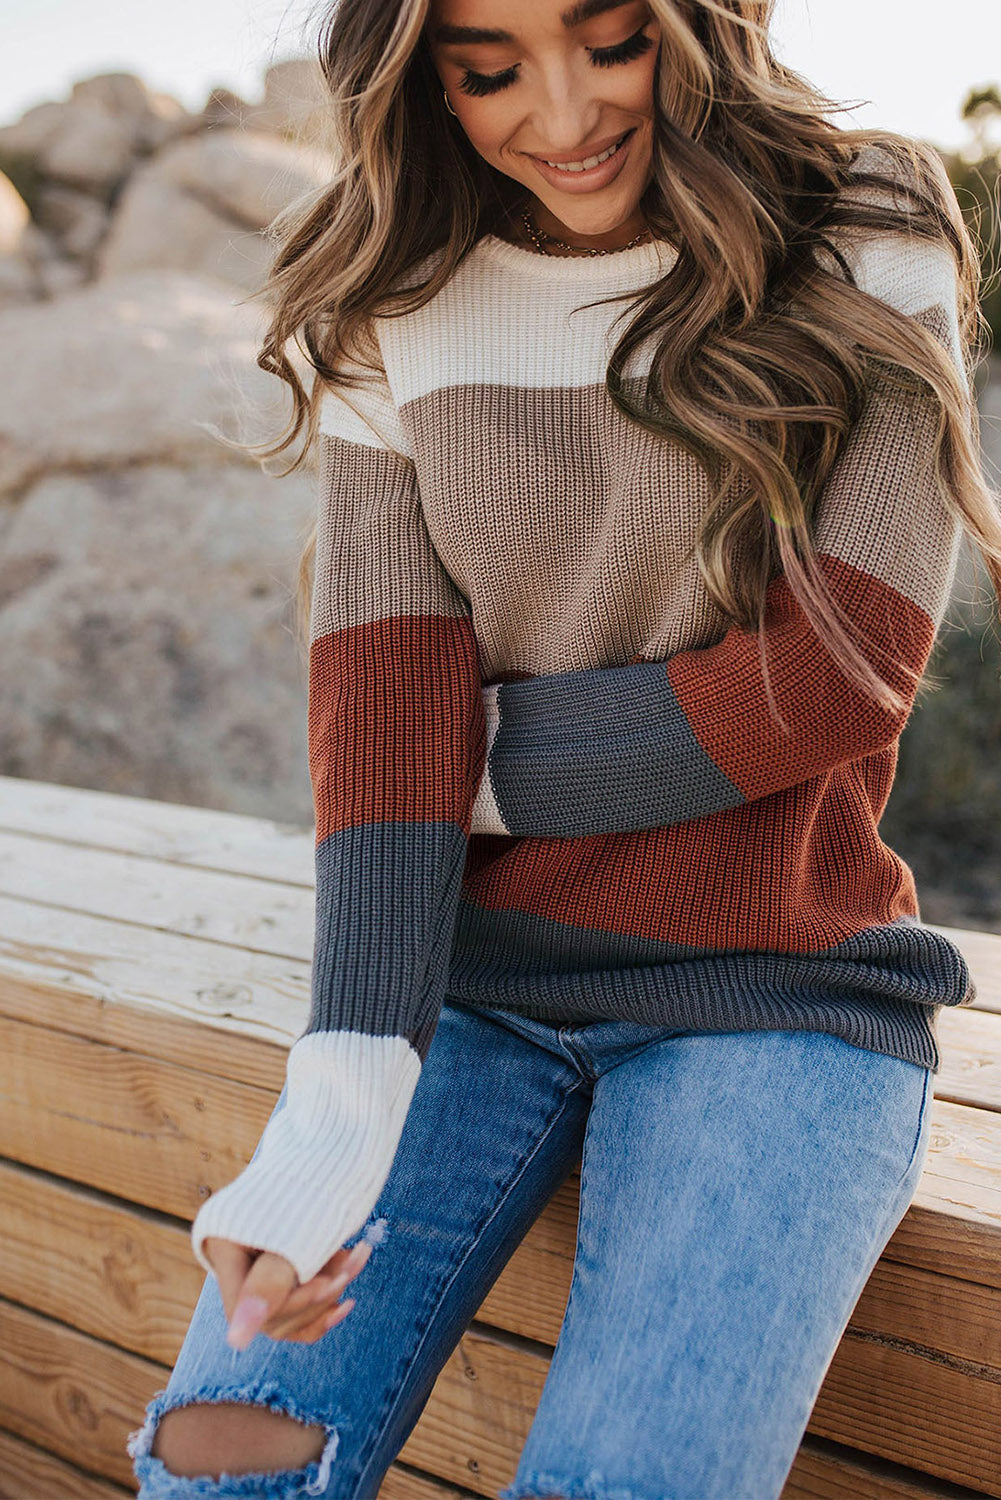 Cali Chic Color Block Knitted O-neck Pullover Sweater